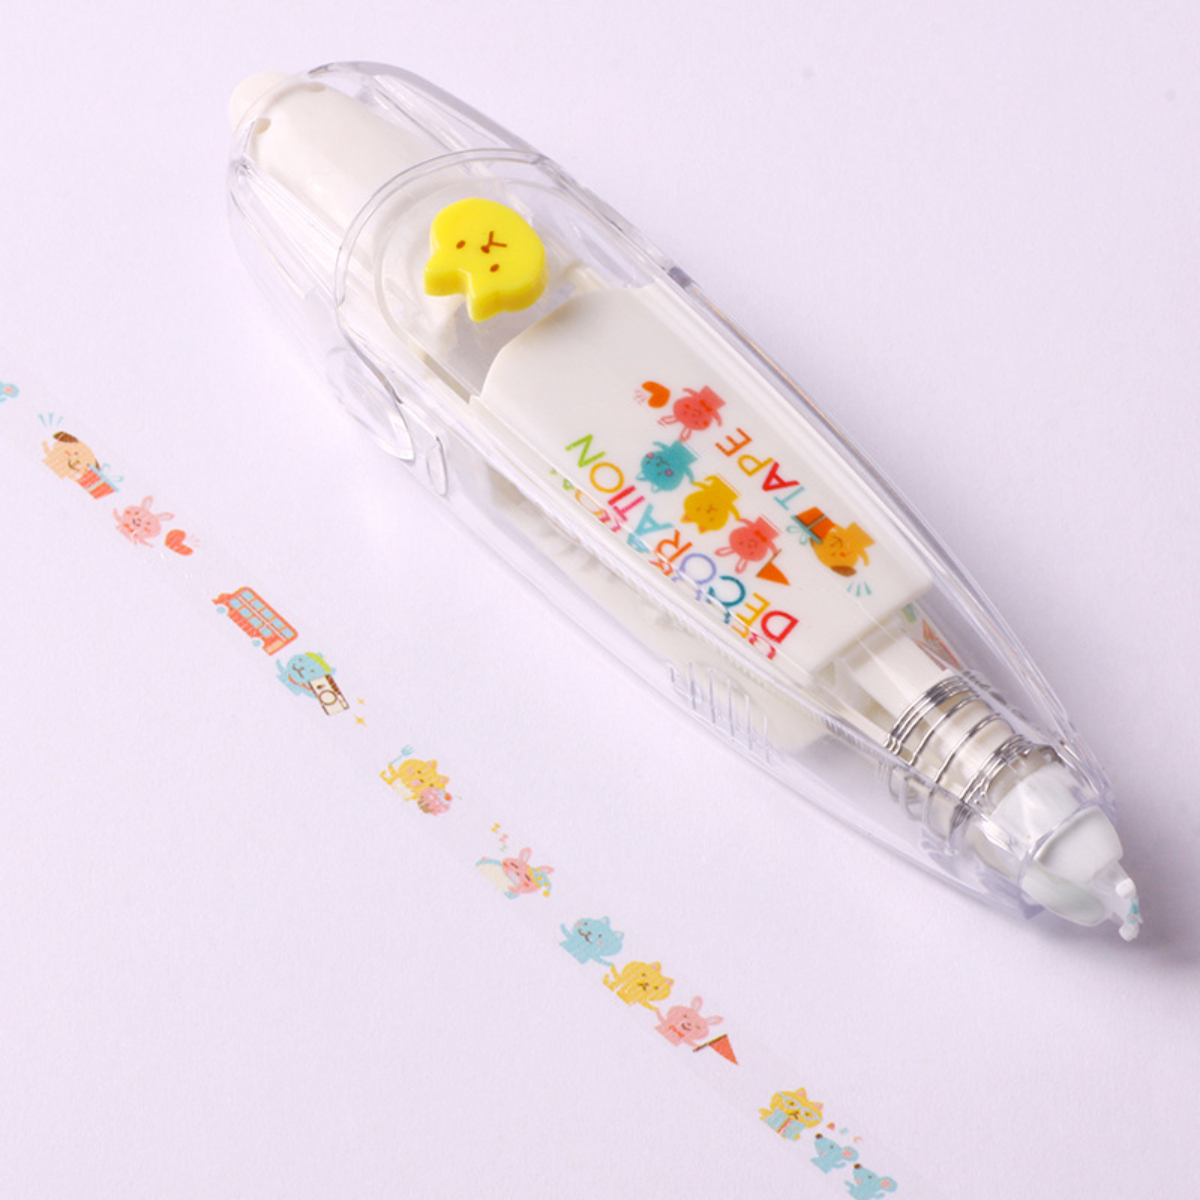 1pc Cute Kawaii Mechanical Design Correction Tape Perfect For Decorating  Diaries And School Supplies, Shop Now For Limited-time Deals